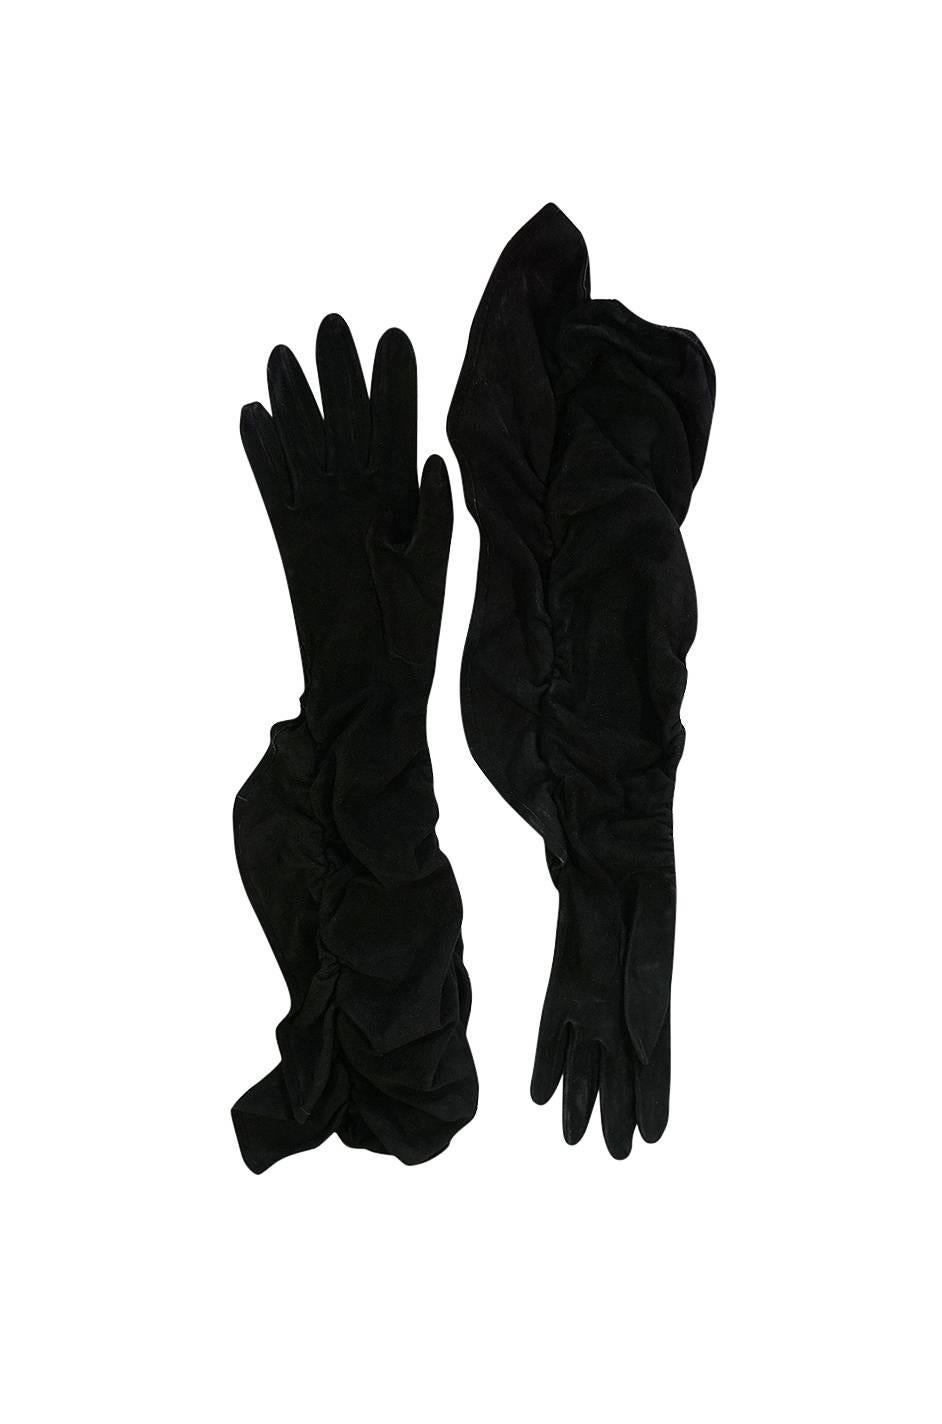 

Wonderful vintage Hermes gloves that are made from the finest, lightest black suede. Each is full opera length so you can wear them high up on the arm well past the elbow or scrunch them down. They are unlined which allows them to perfectly mold